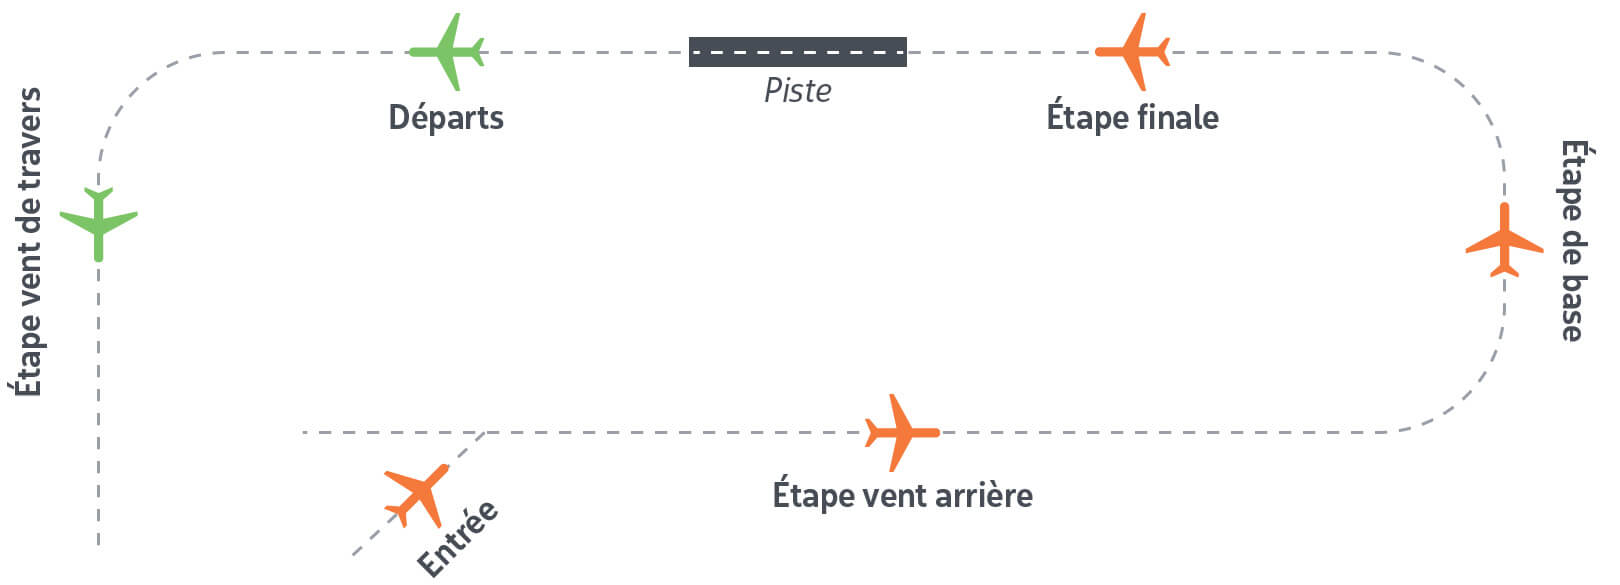 Diagram explaining a standard landing pattern for a runway. Arriving aircraft follow an Entry, Downwind, Base and Final leg towards the runway. Departing aircraft follow a Departure leg in the direction of the runway, followed by a 90-degree turn to a Crosswind Leg.